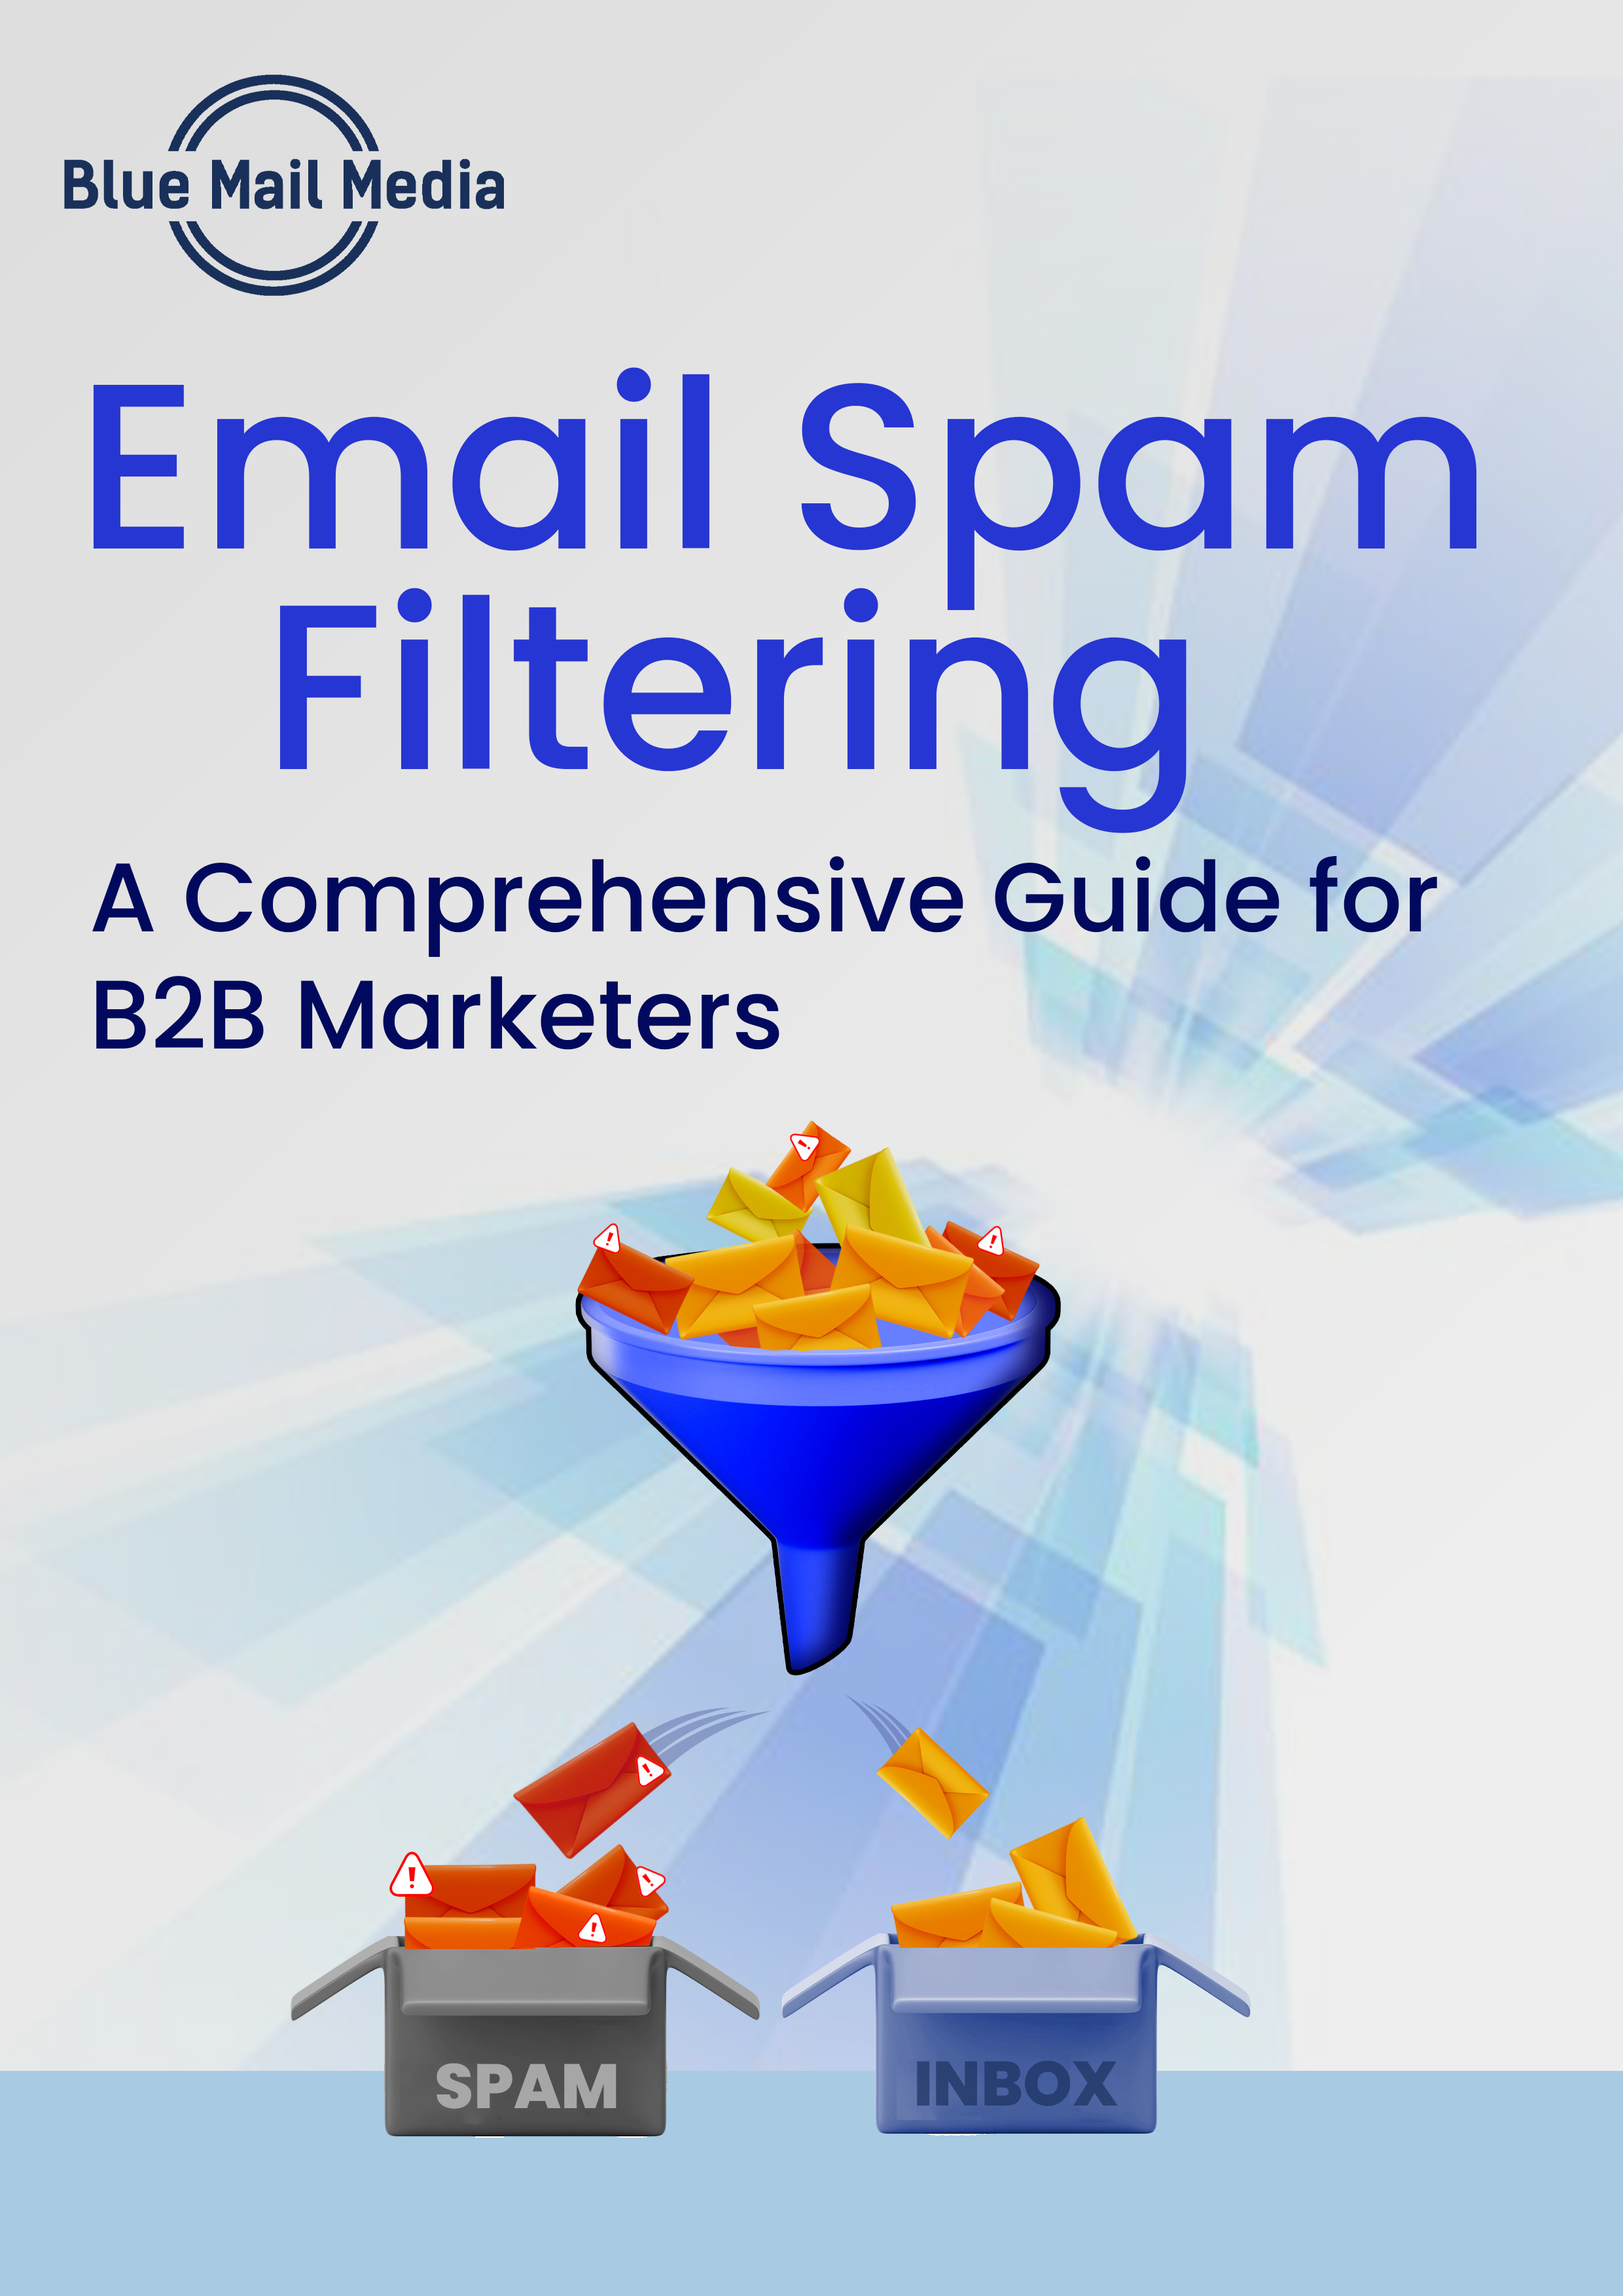 Email spam filtering